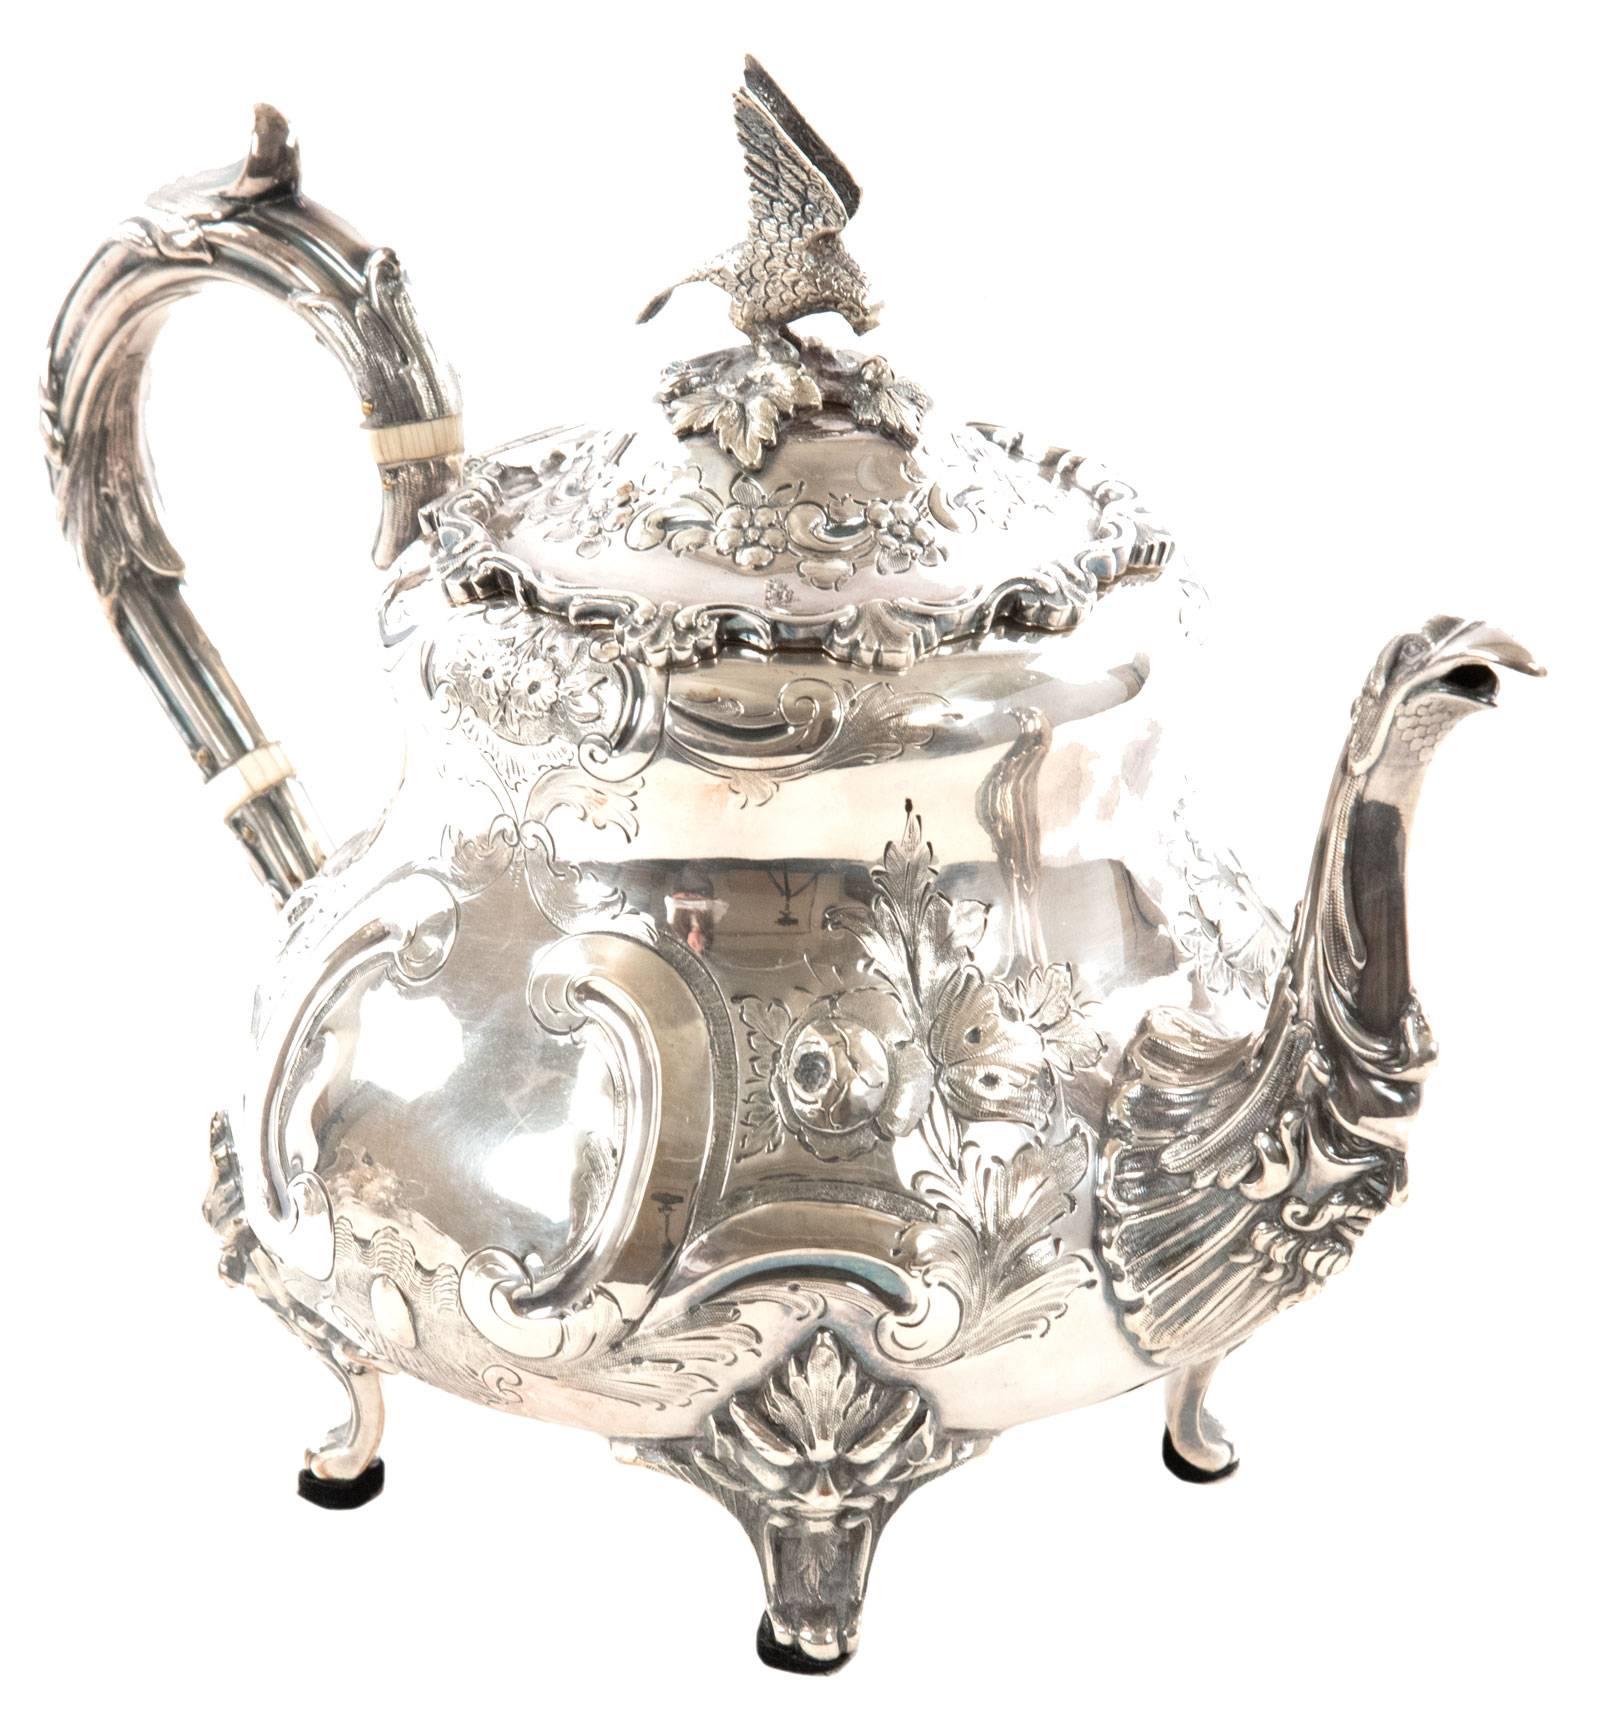 A Victorian English silver plate tea service with tea pot, sugar bowl and milk jug, of baluster form and ornately decorated in the Louis style. The lower portion of the body is embellished with chased scroll, floral and leaf decoration on a scale